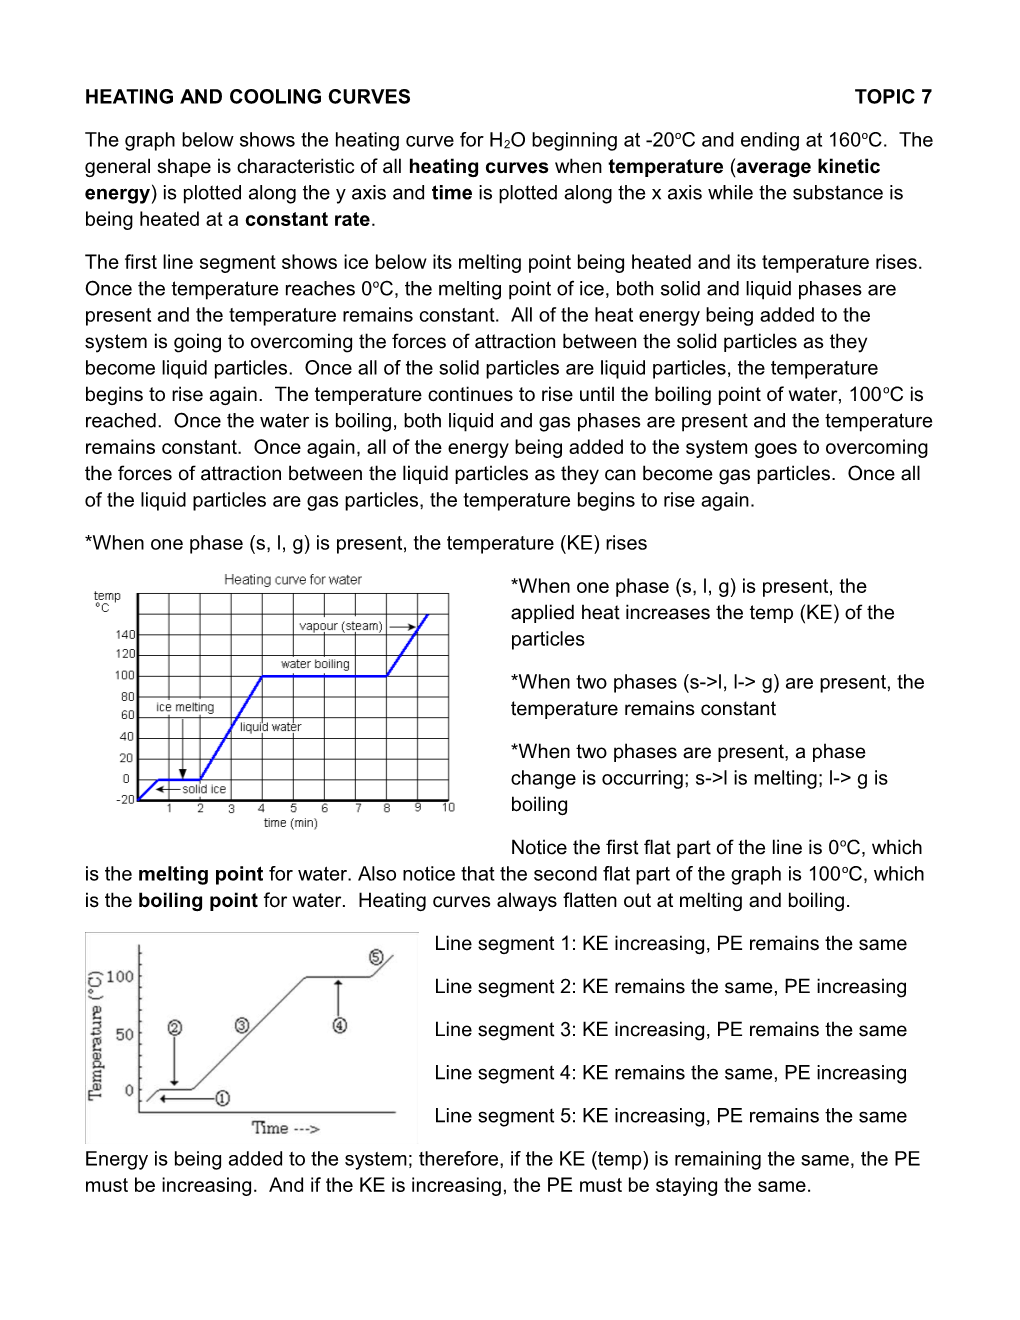 Heating and Cooling Curves Topic 7